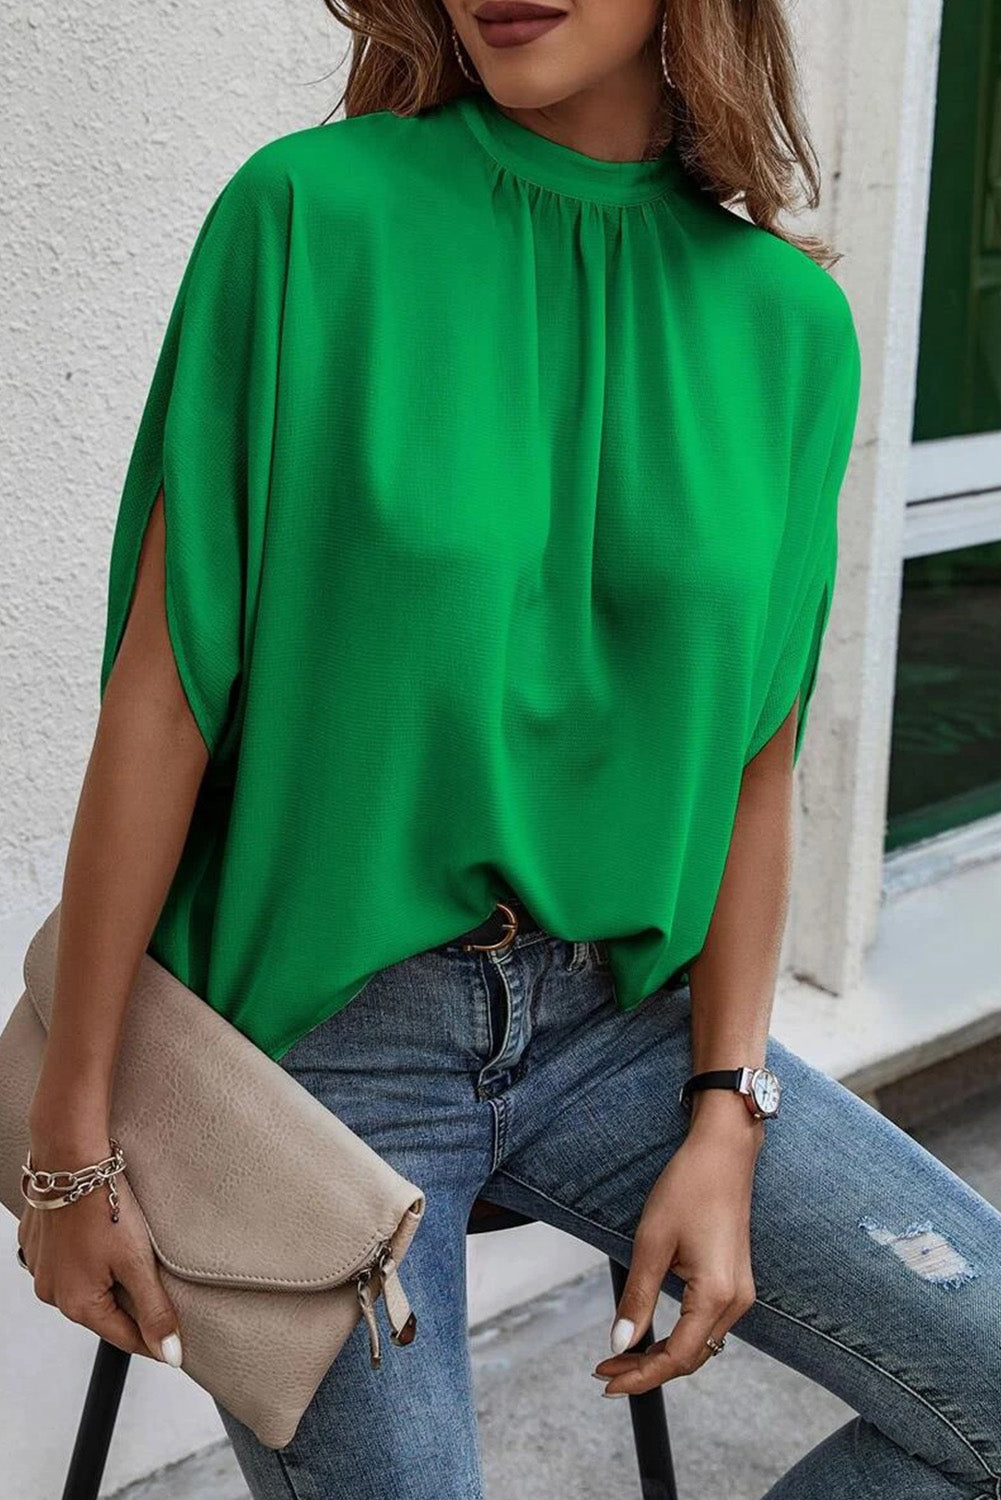 Bright Green Solid Color Batwing Sleeve Knotted Blouse